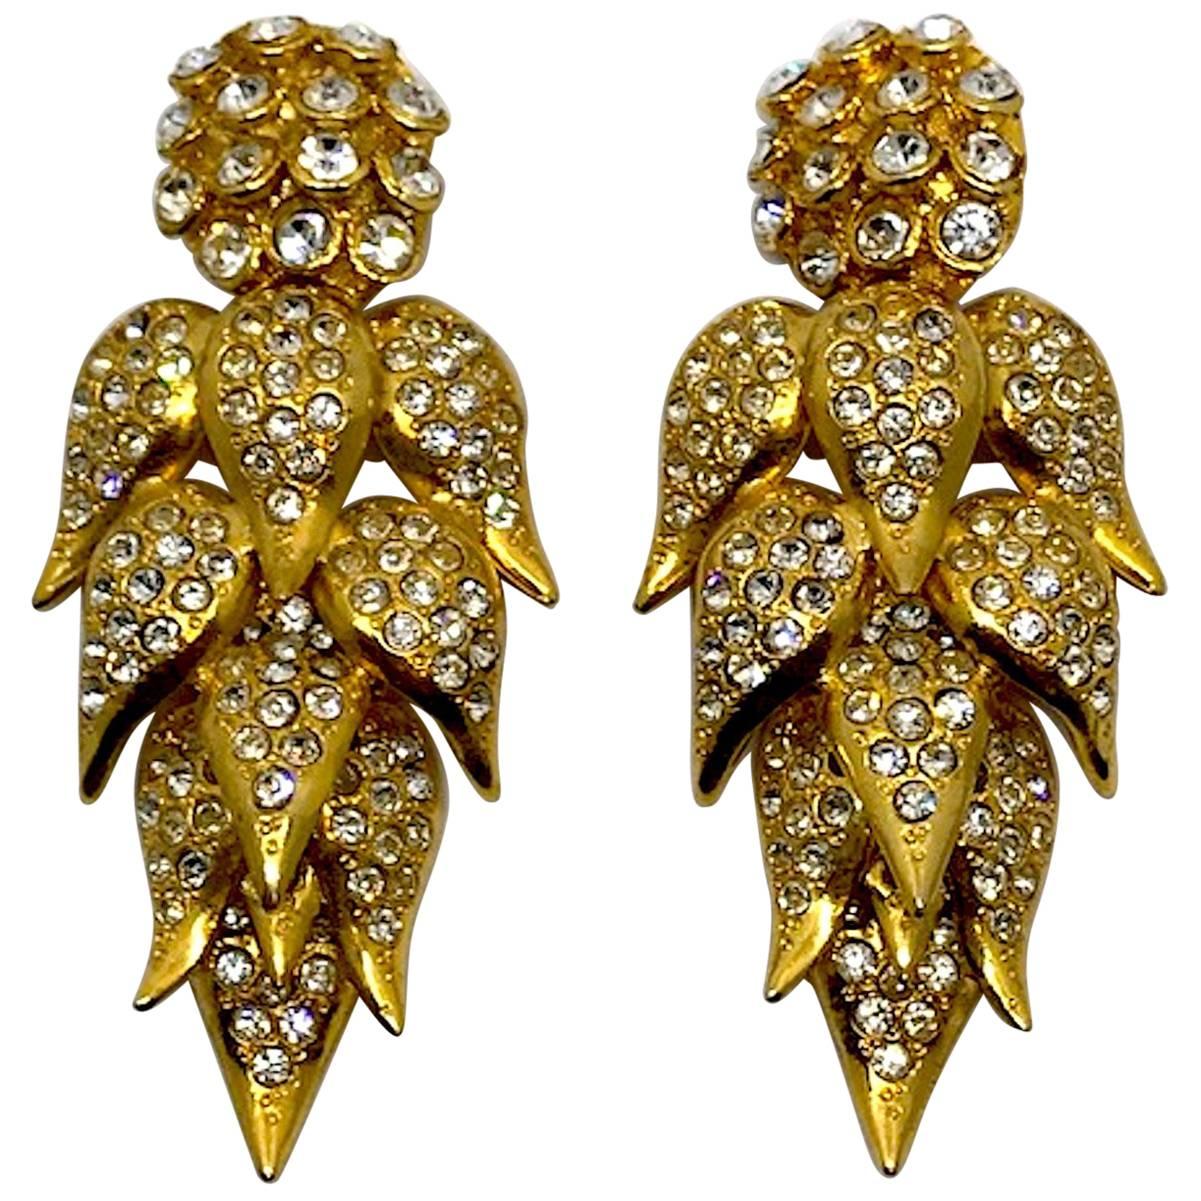 De Liguoro large earrings from Actress Elsa Martinelli's personal collection